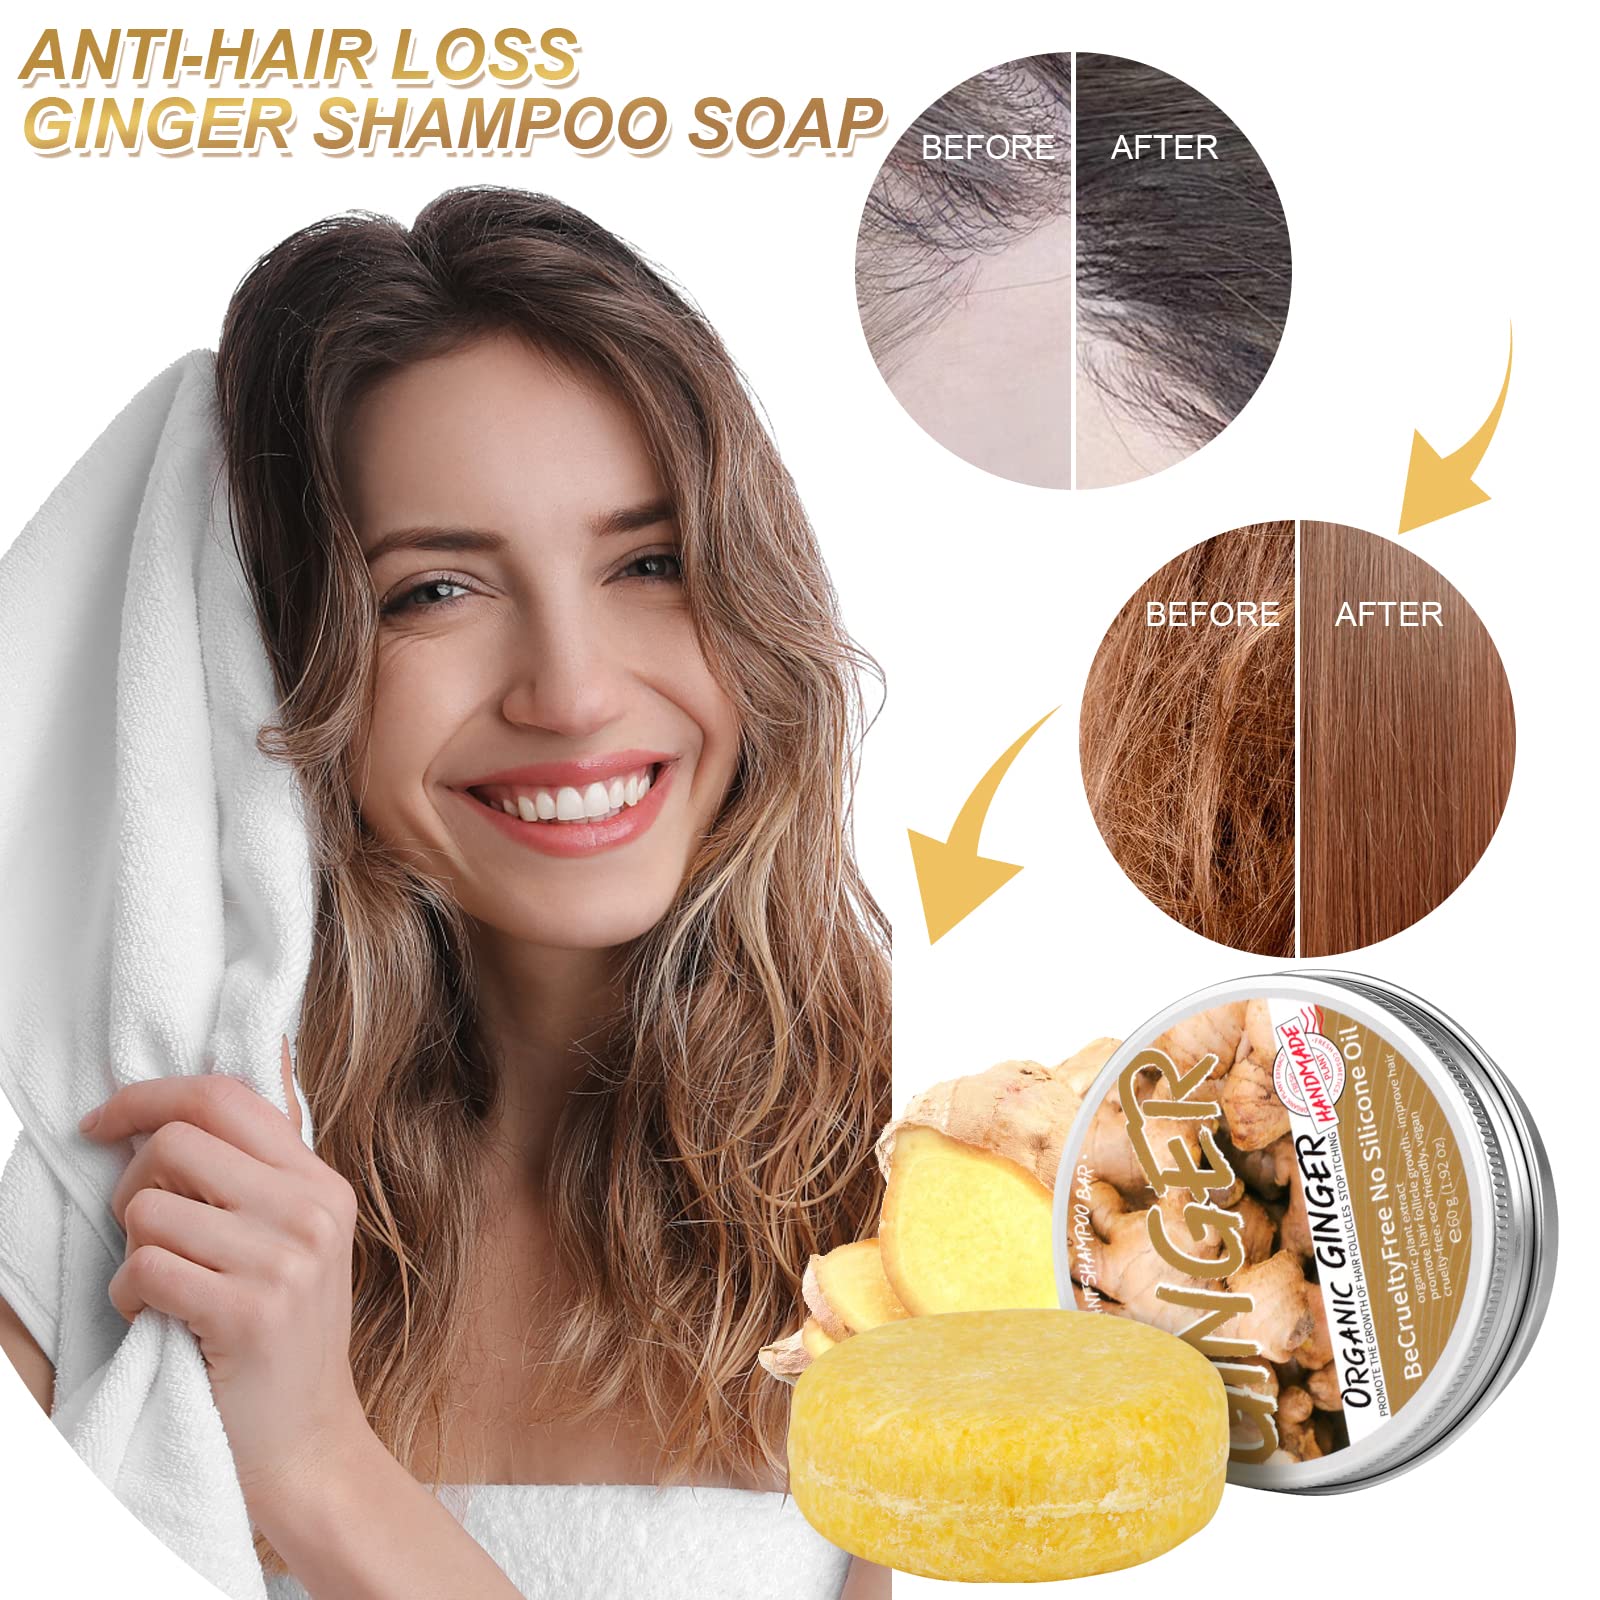 3Pcs Ginger Hair Regrowth Shampoo Bar, Anti-hair Loss Ginger Shampoo Soap, Natural Organic Ginger Shampoo Bar, Promotes Hair Growth Ginger Shampoo Soap for All Hair Types and Ages